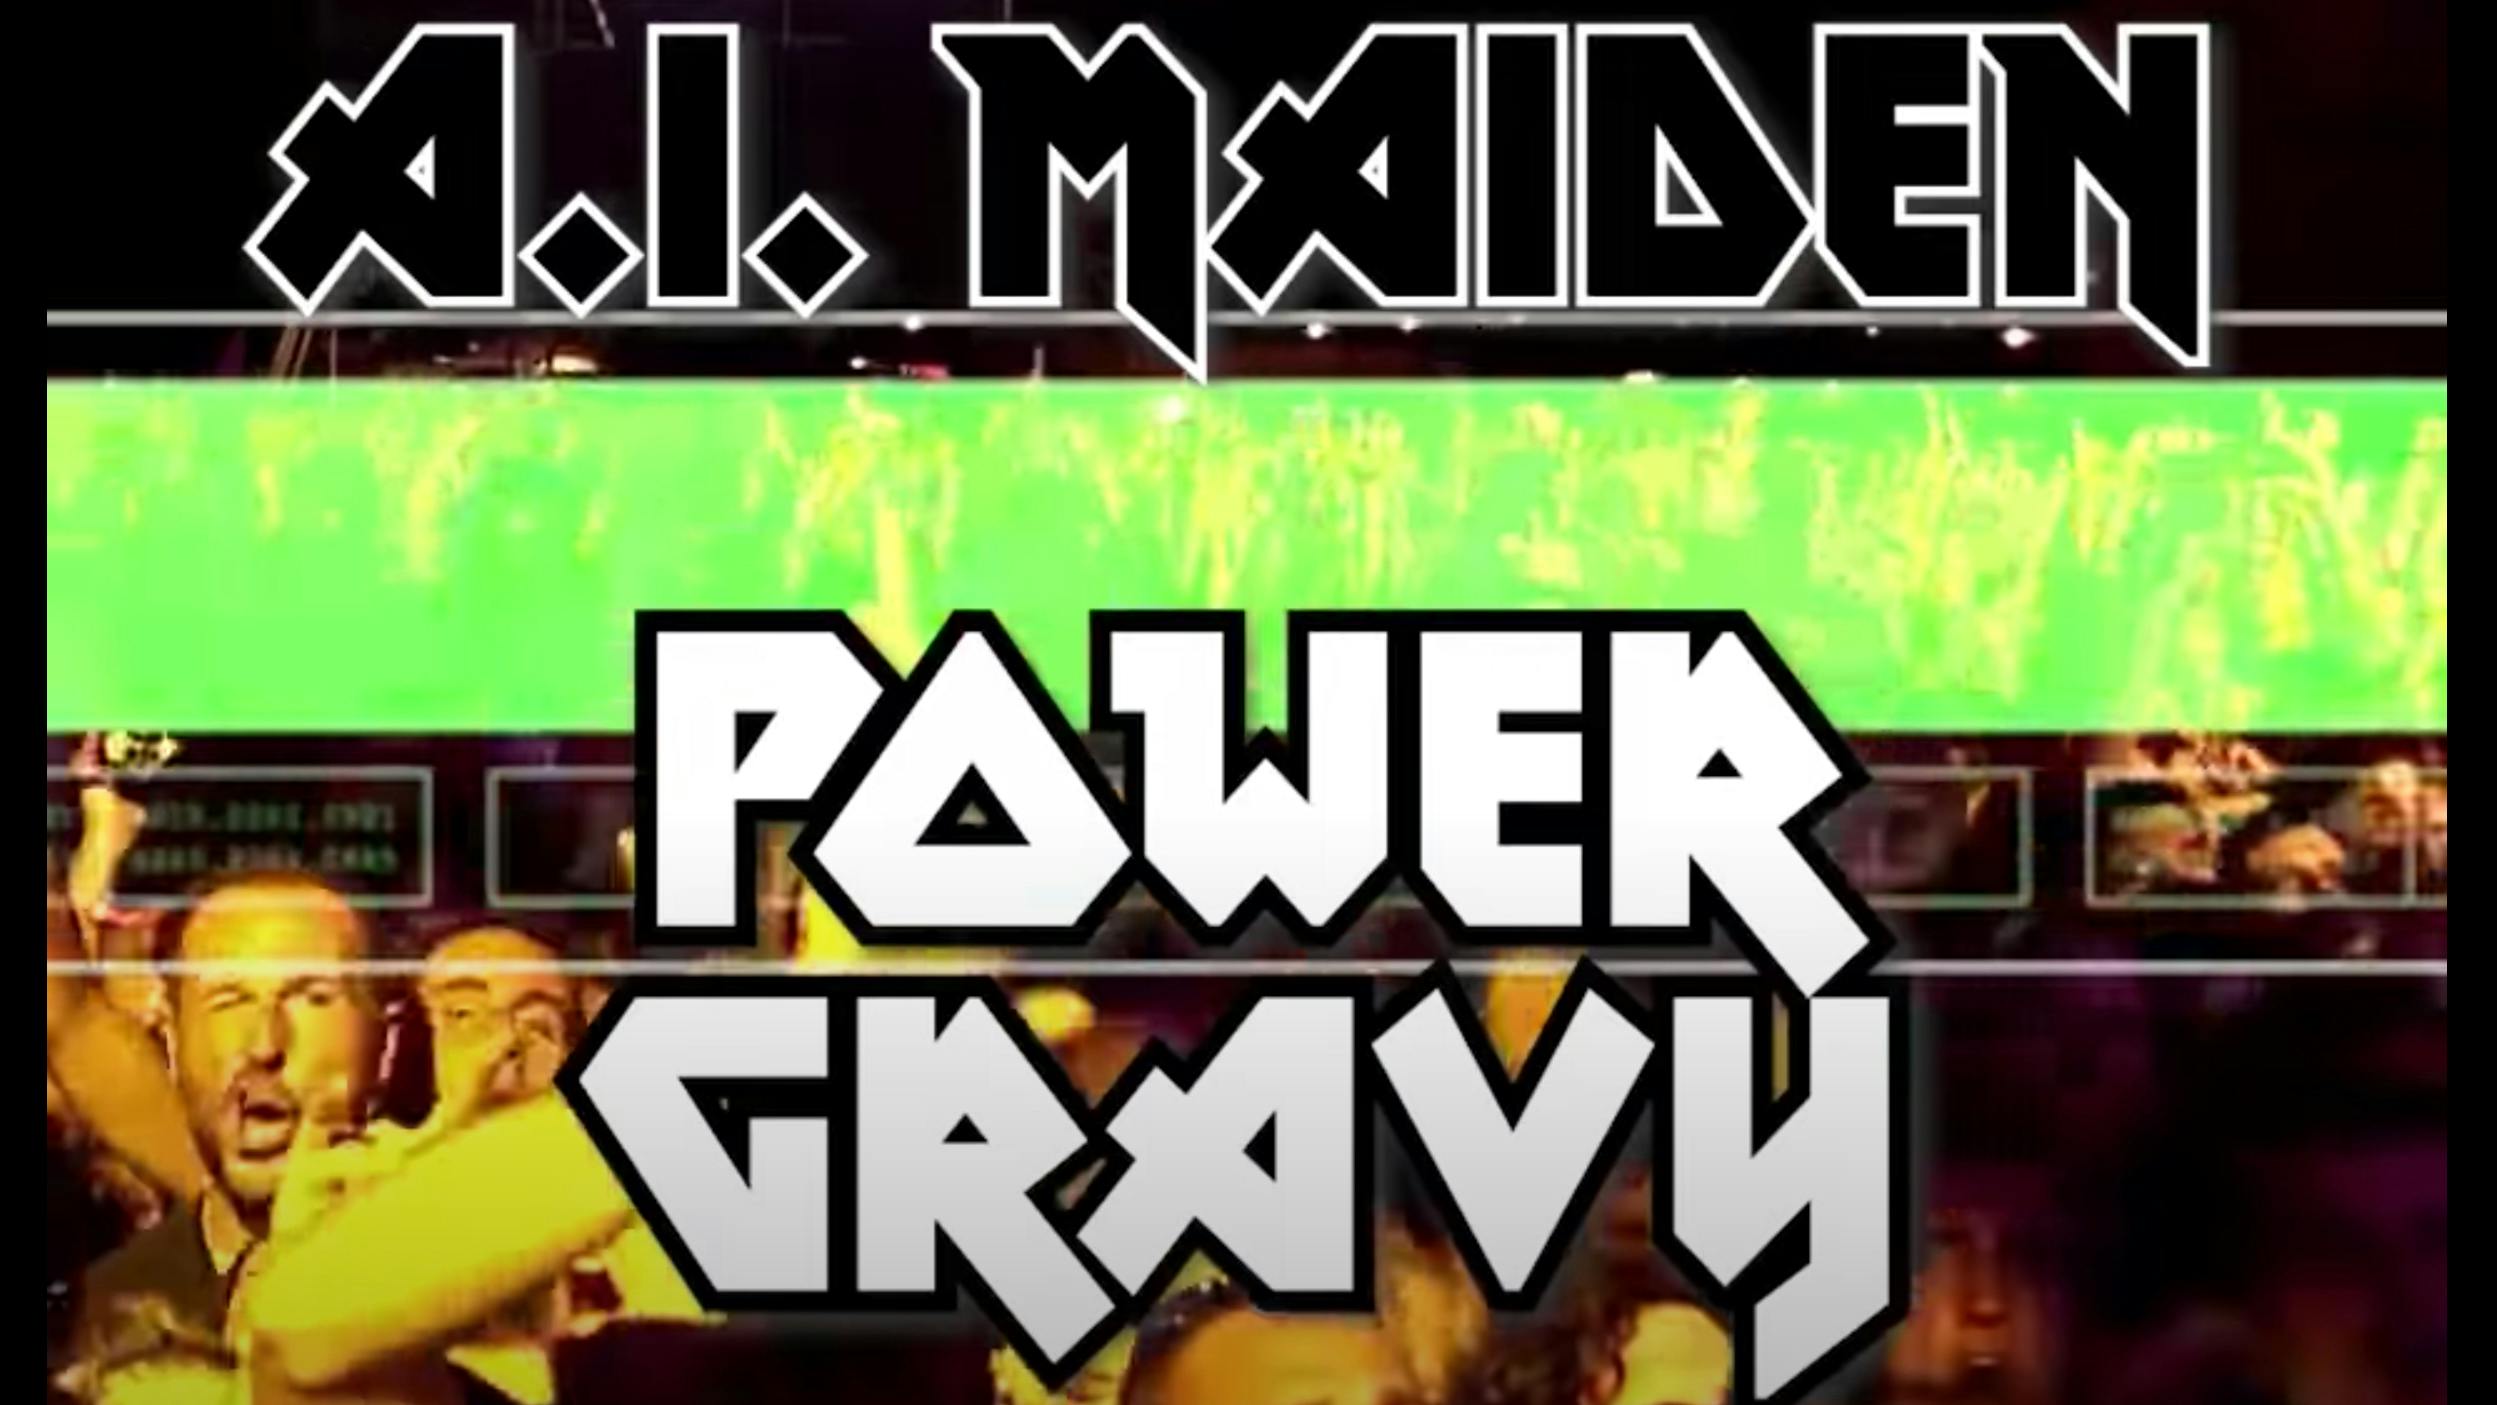 YouTuber Uses Artificial Intelligence To Make Fake Iron Maiden Song, Power Gravy